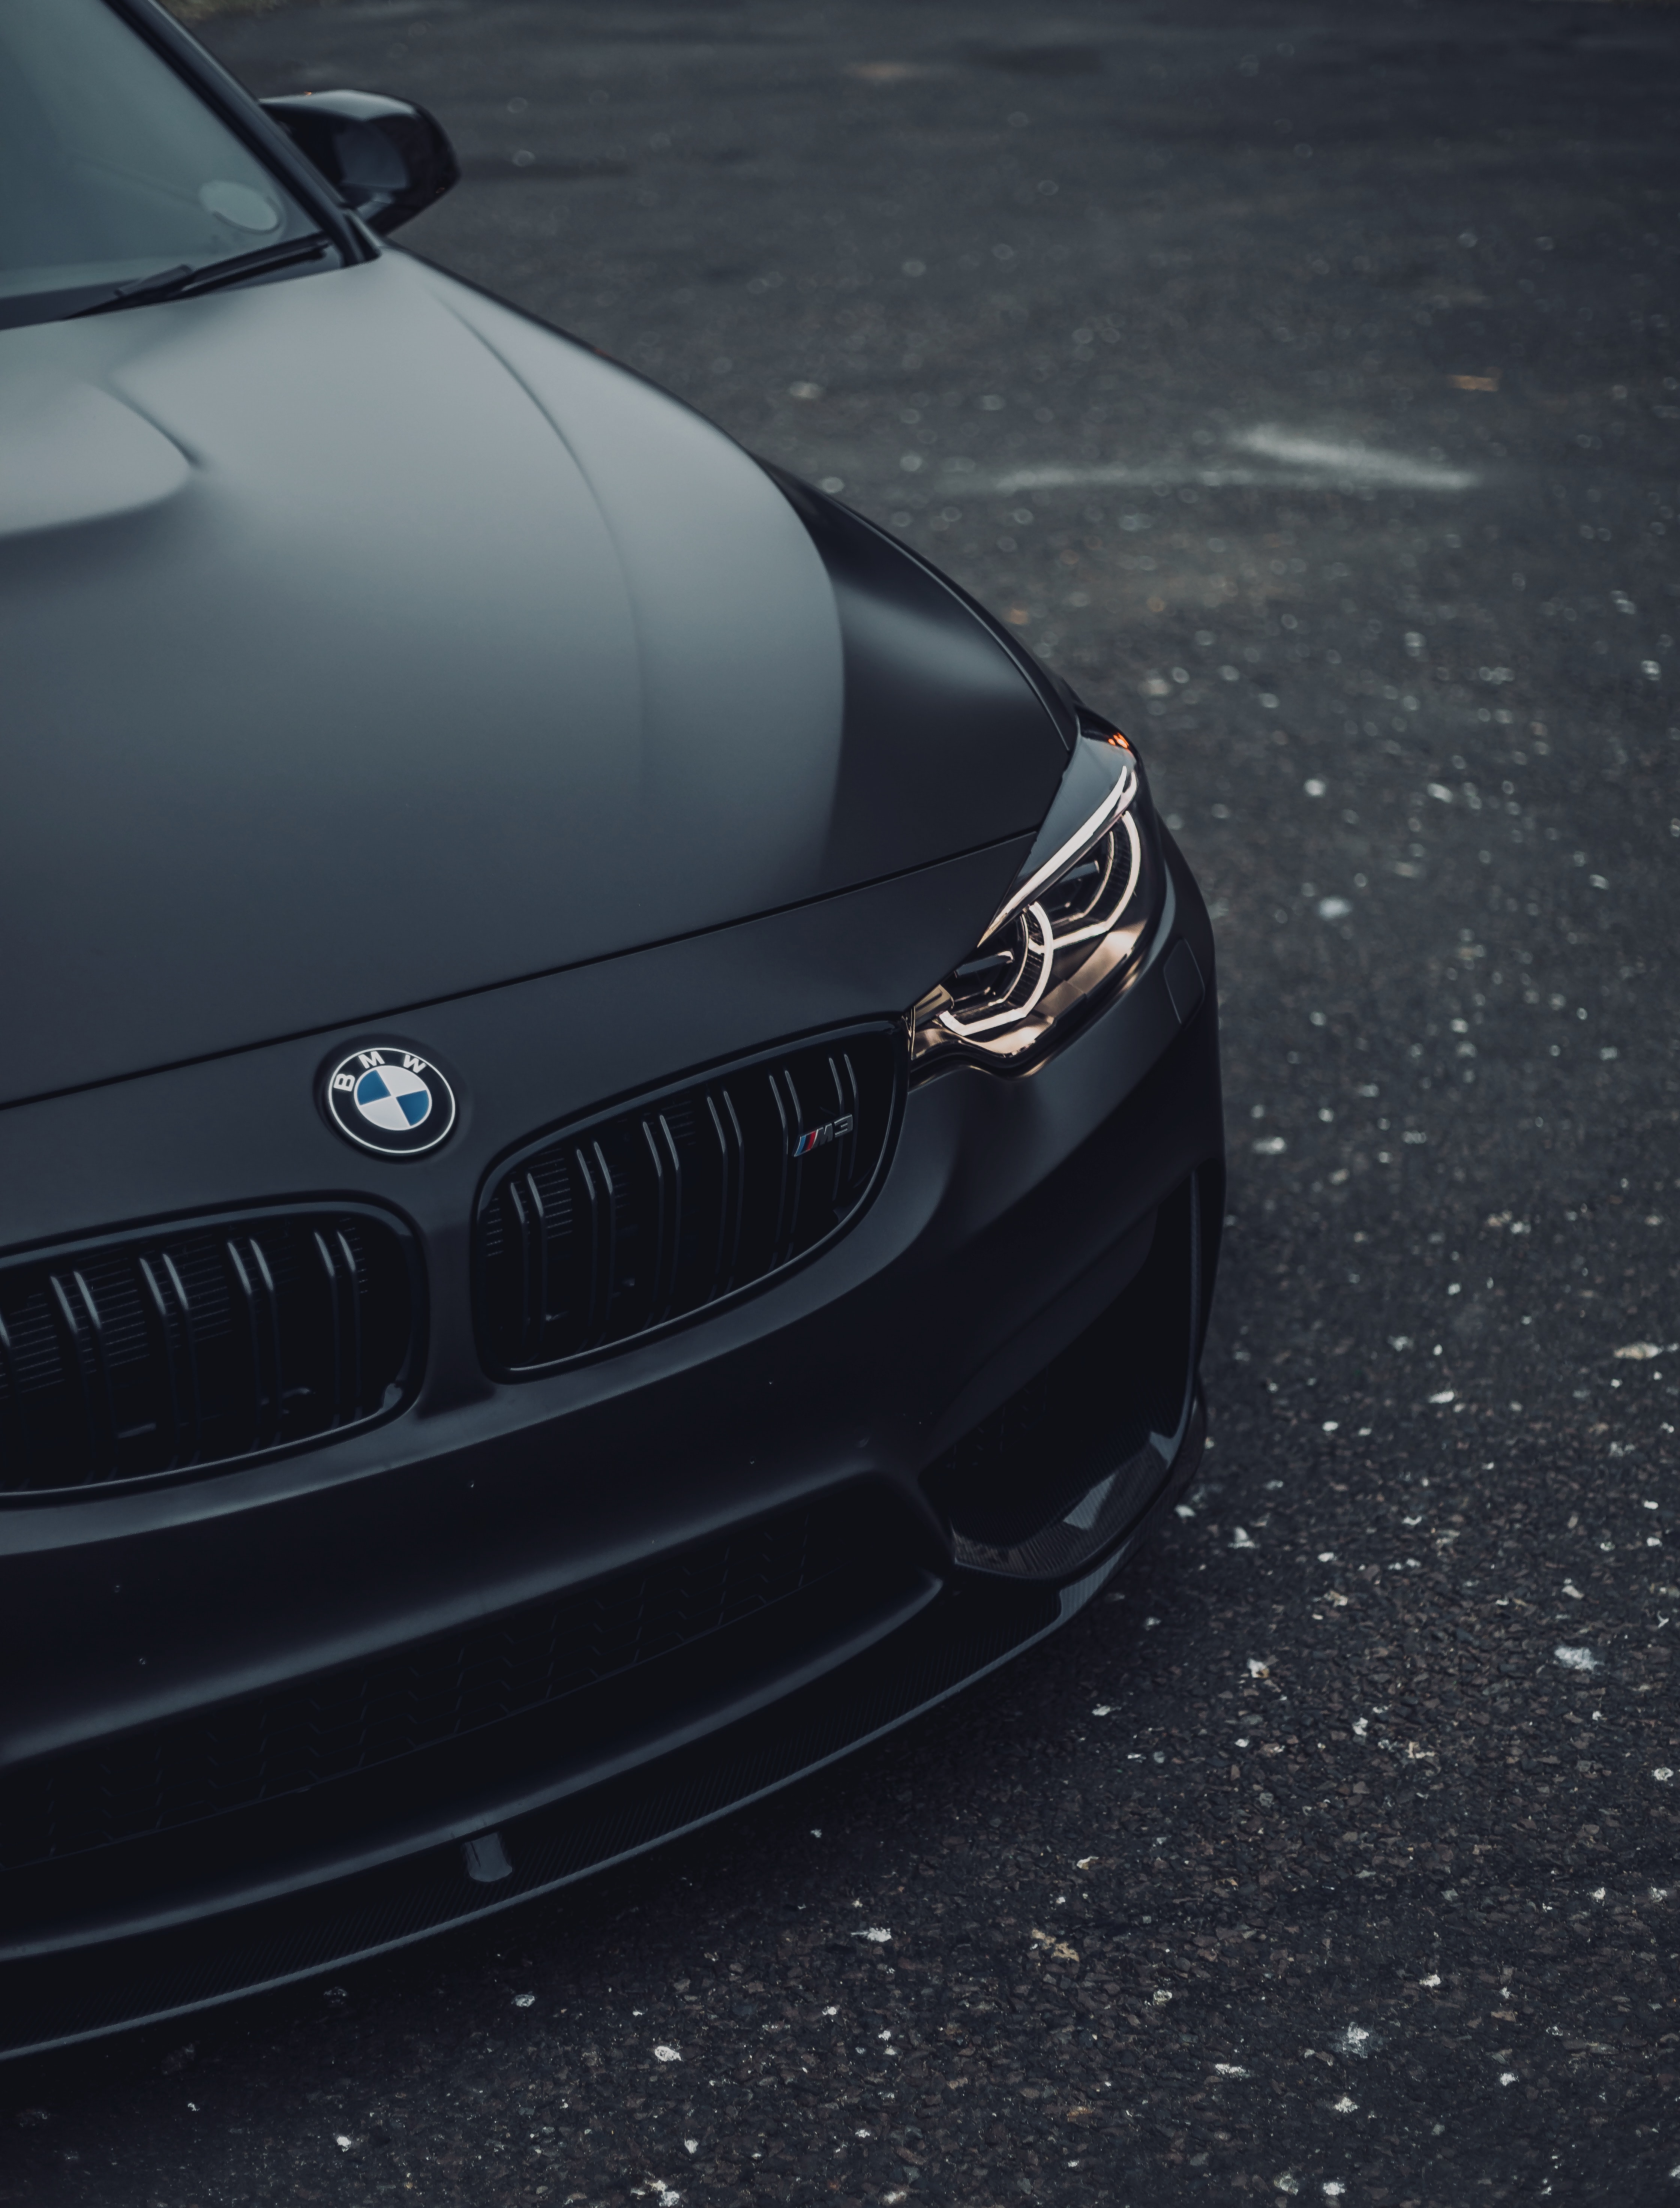 Popular Bmw Image for Phone